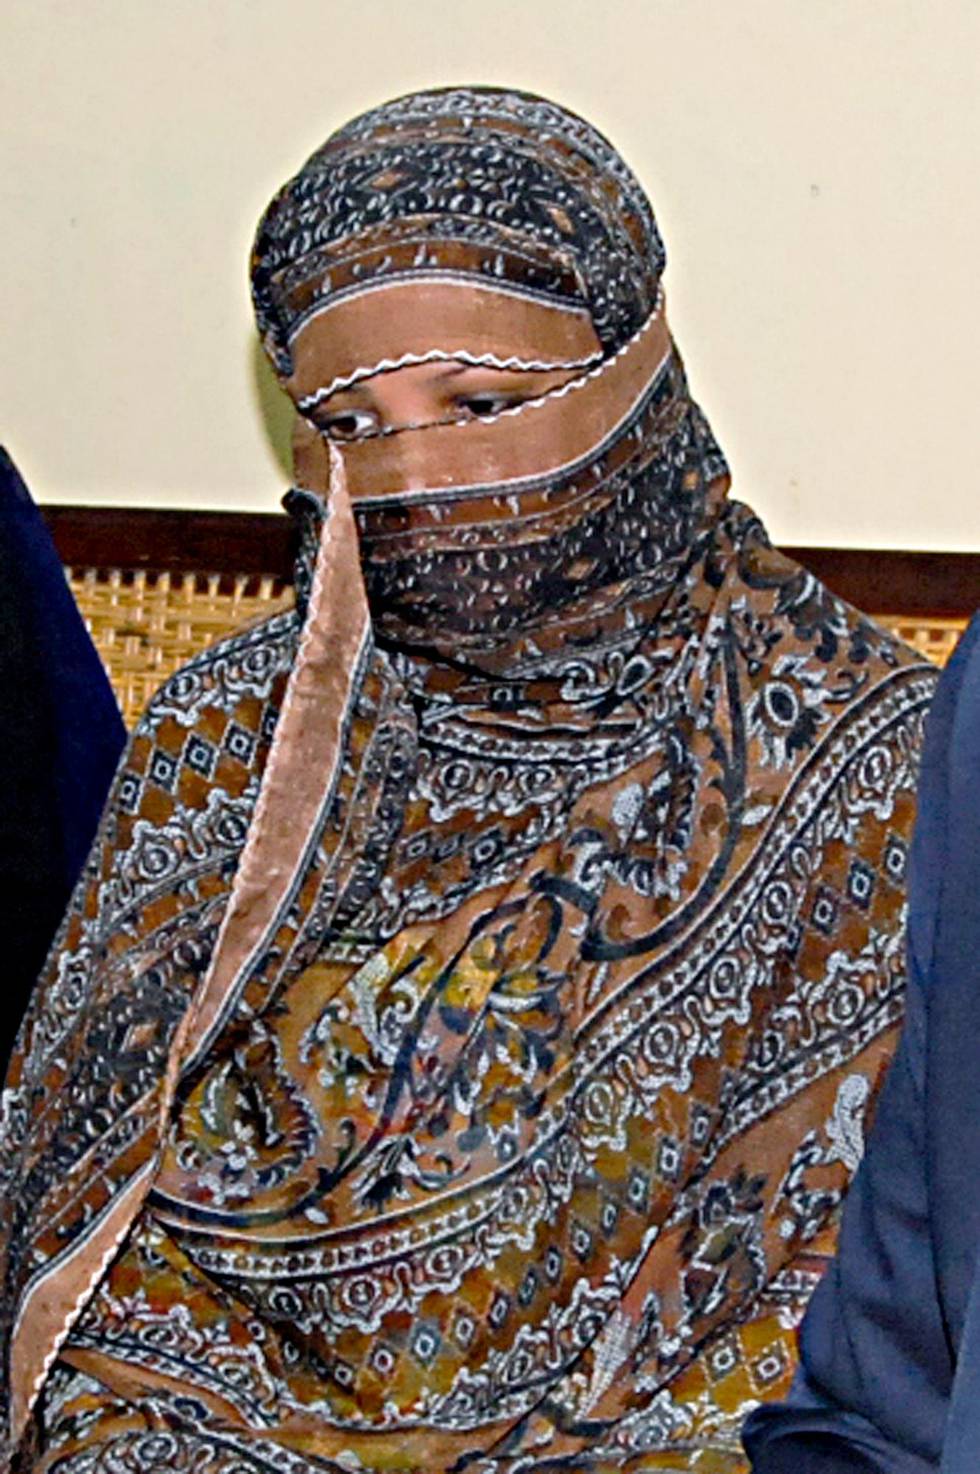 FILE - In this Nov. 20, 2010, file photo, Asia Bibi, a Pakistani Christian woman, listens to officials at a prison in Sheikhupura near Lahore, Pakistan. Pakistan's Supreme Court has postponed its ruling on the final appeal of Bibi who has been on death row since 2010 after being convicted of blasphemy against Islam. Bibi's case has generated international outrage, but within Pakistan it has fired up radical Islamists, who use the blasphemy law to rally supporters and intimidate mainstream political parties. (AP Photo, File)